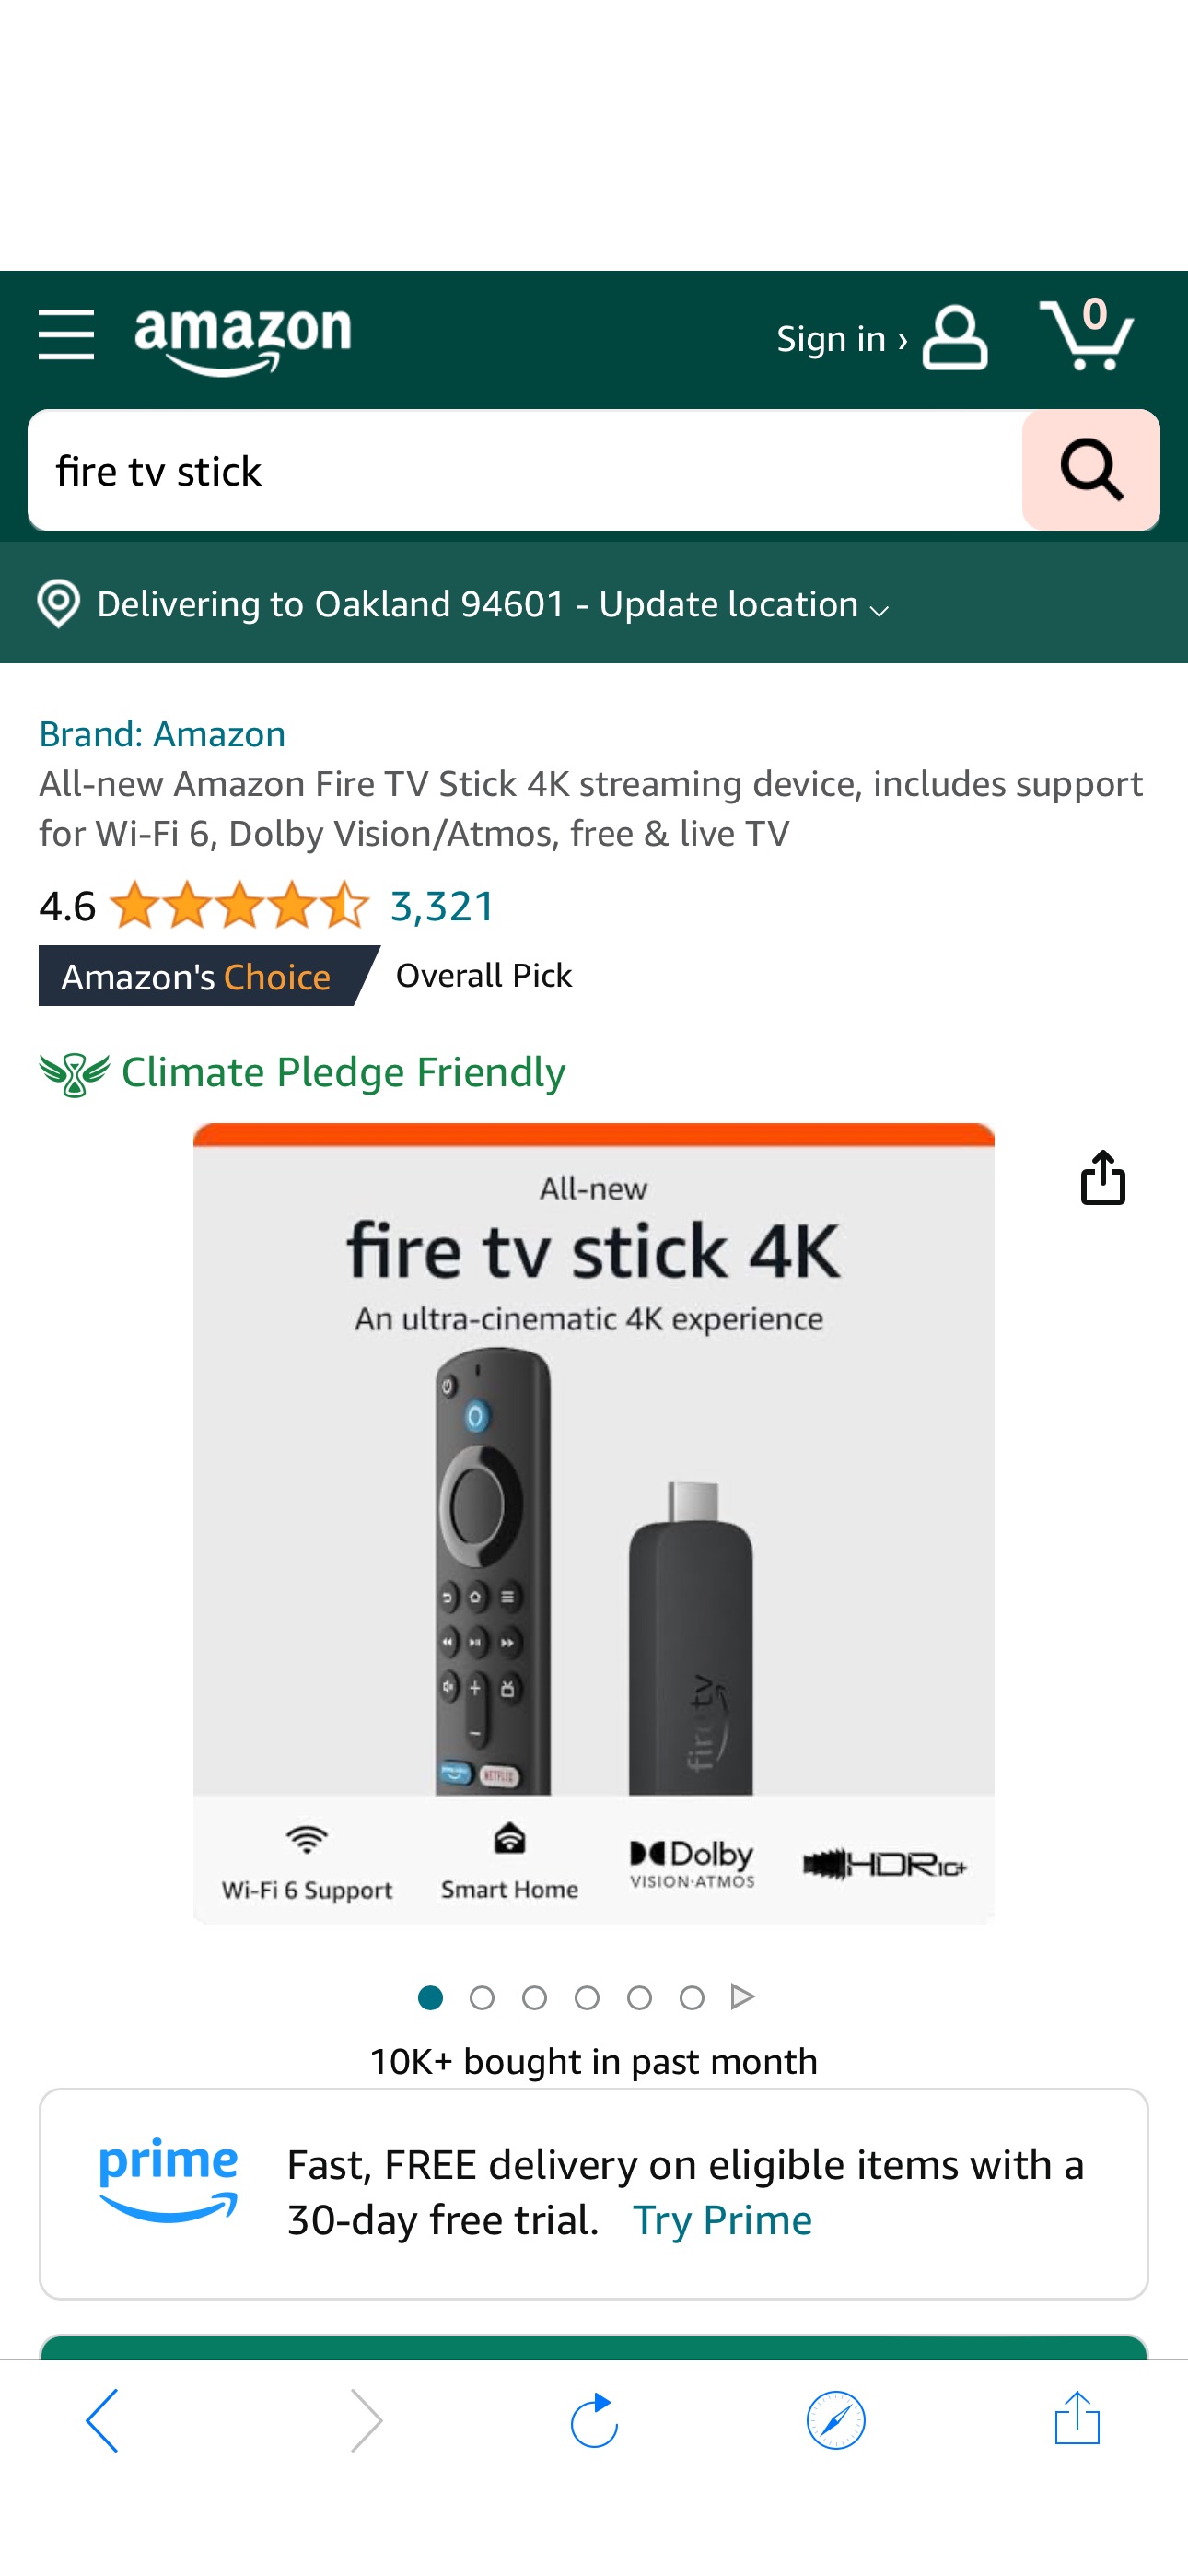 All-new Amazon Fire TV Stick 4K streaming device